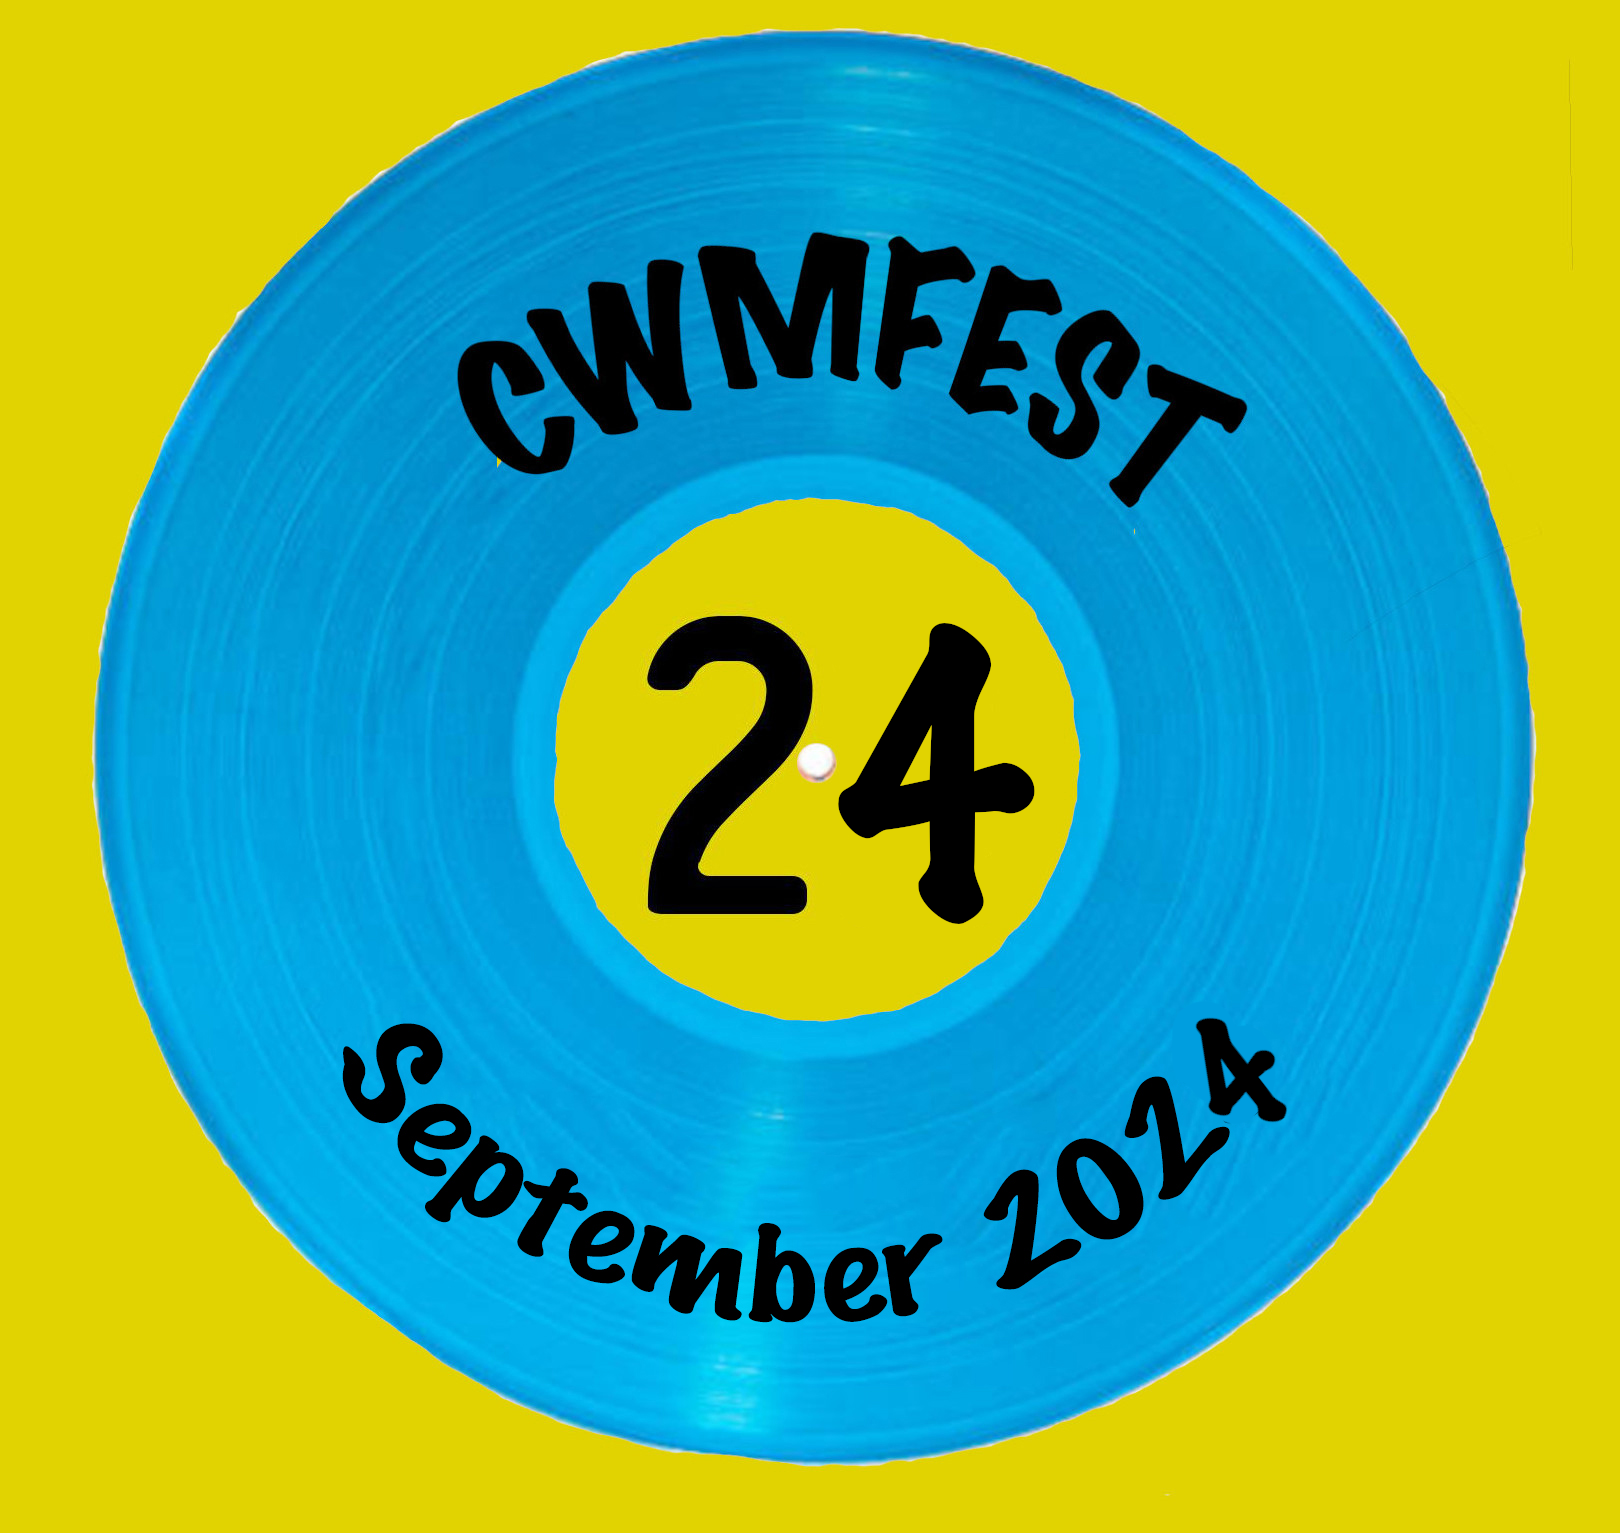 Cwmfest is coming!